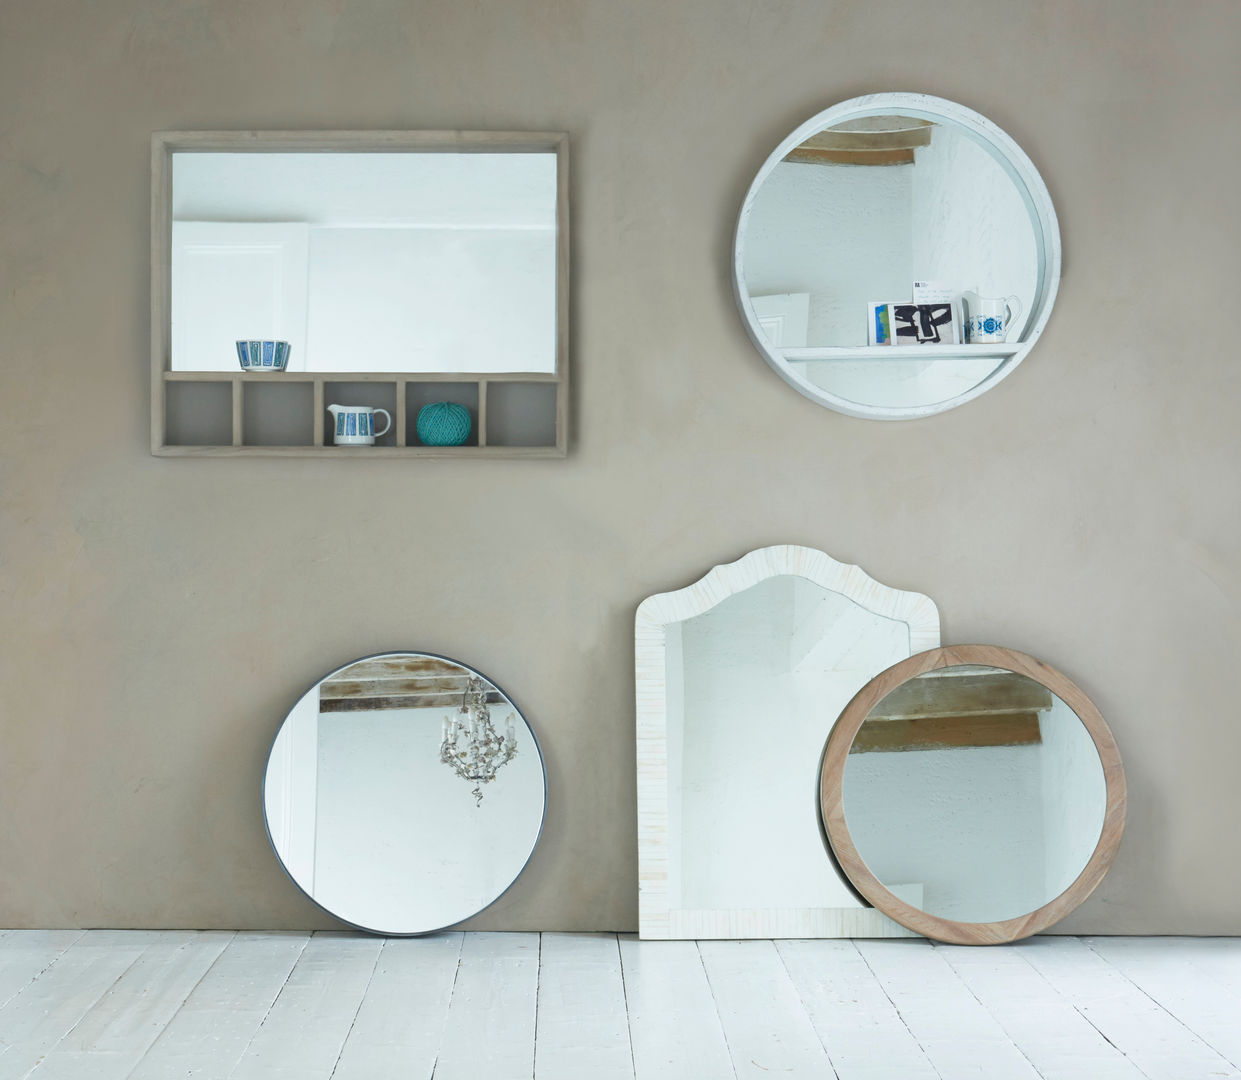 Loaf's SS17 mirror range homify Classic style houses mirror,portrait,round,circular,wooden frame,brass frame,shelving,bone,wall-mounted,Accessories & decoration